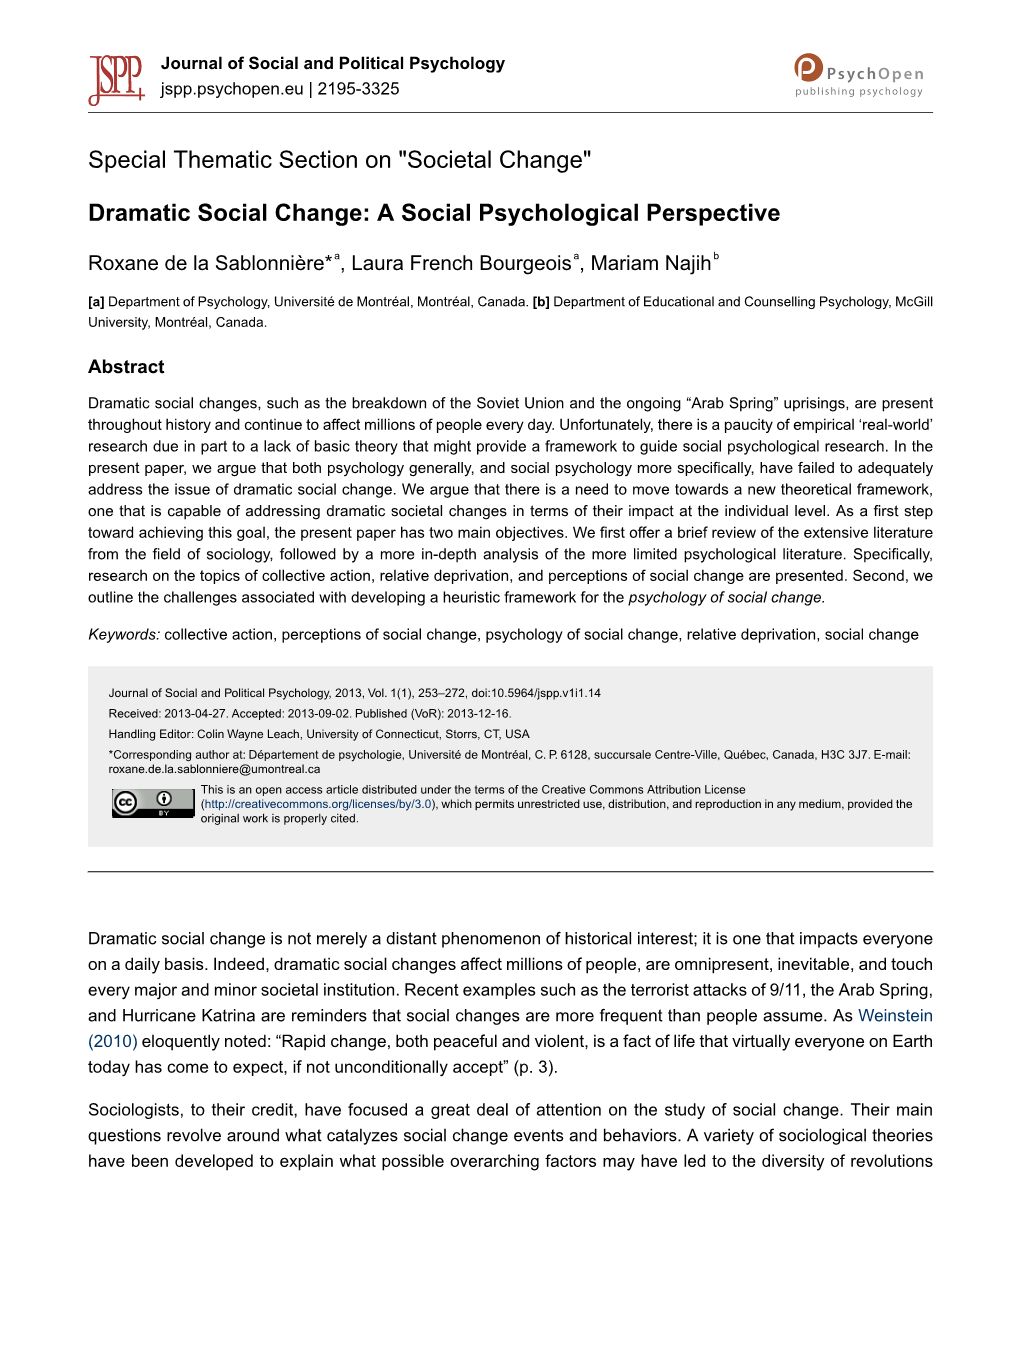 Dramatic Social Change: a Social Psychological Perspective